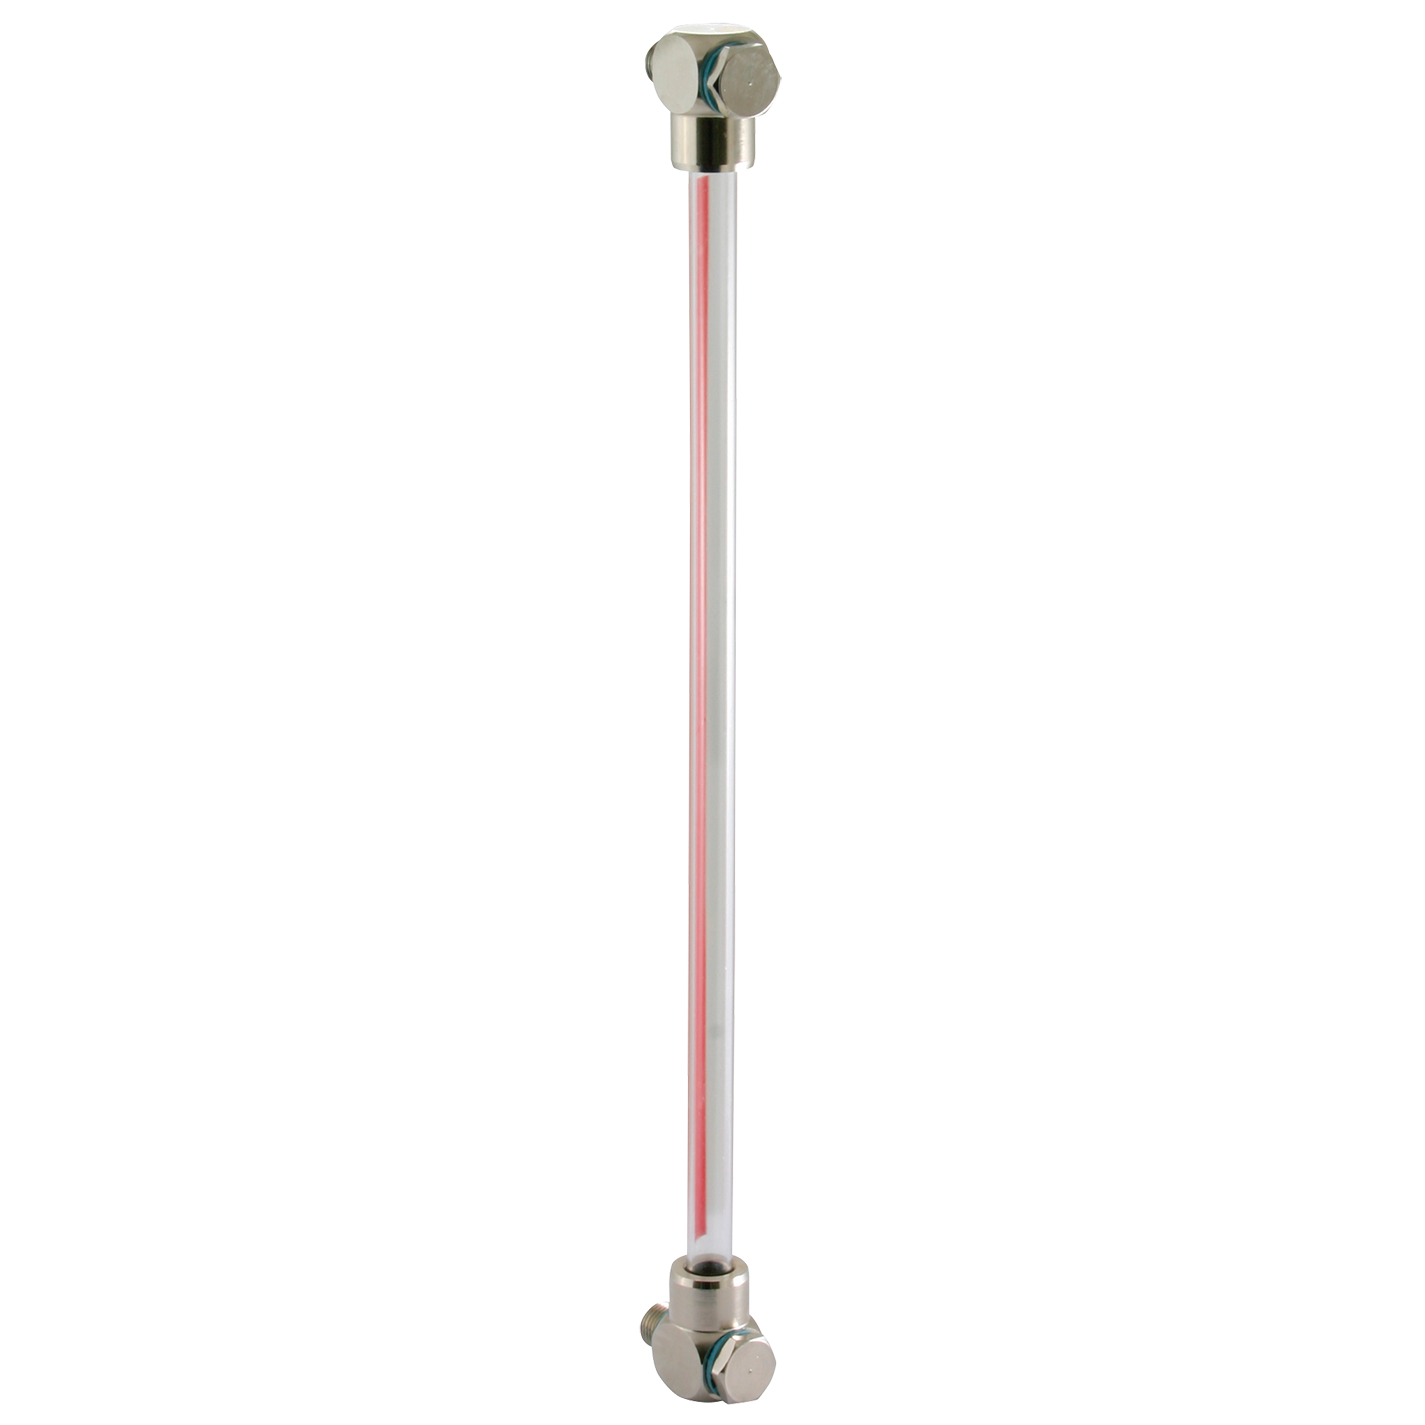 1/4" BSP Fluid Level Gauge W/O Thermometer Centres 400mm